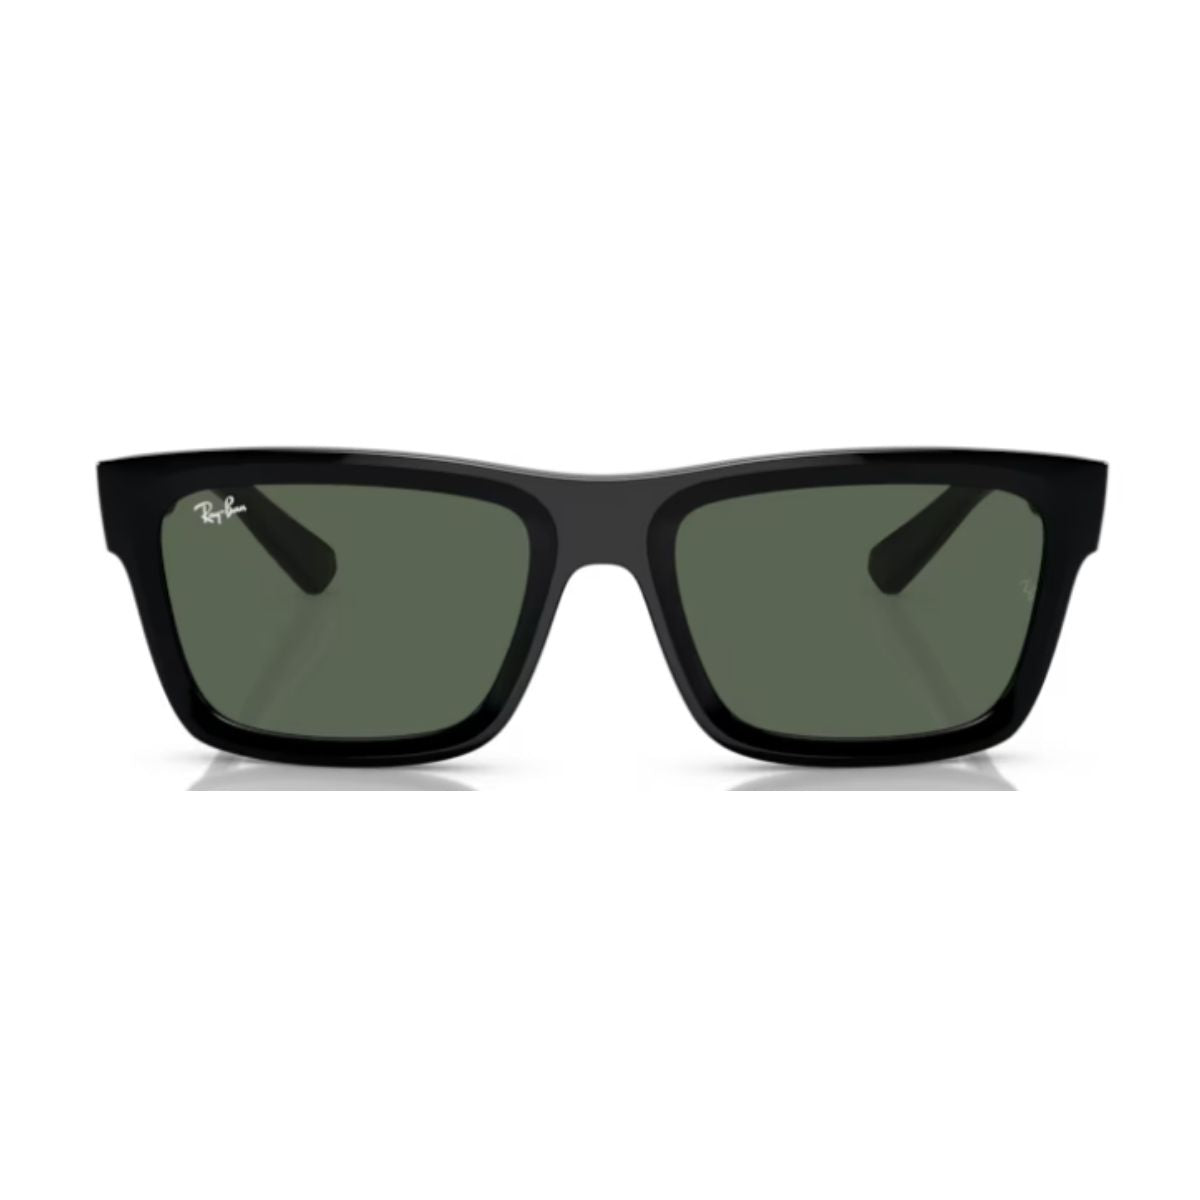 "Buy Ray Ban 4396 6677/71 UV protection Sunglass For Men's At Optorium"